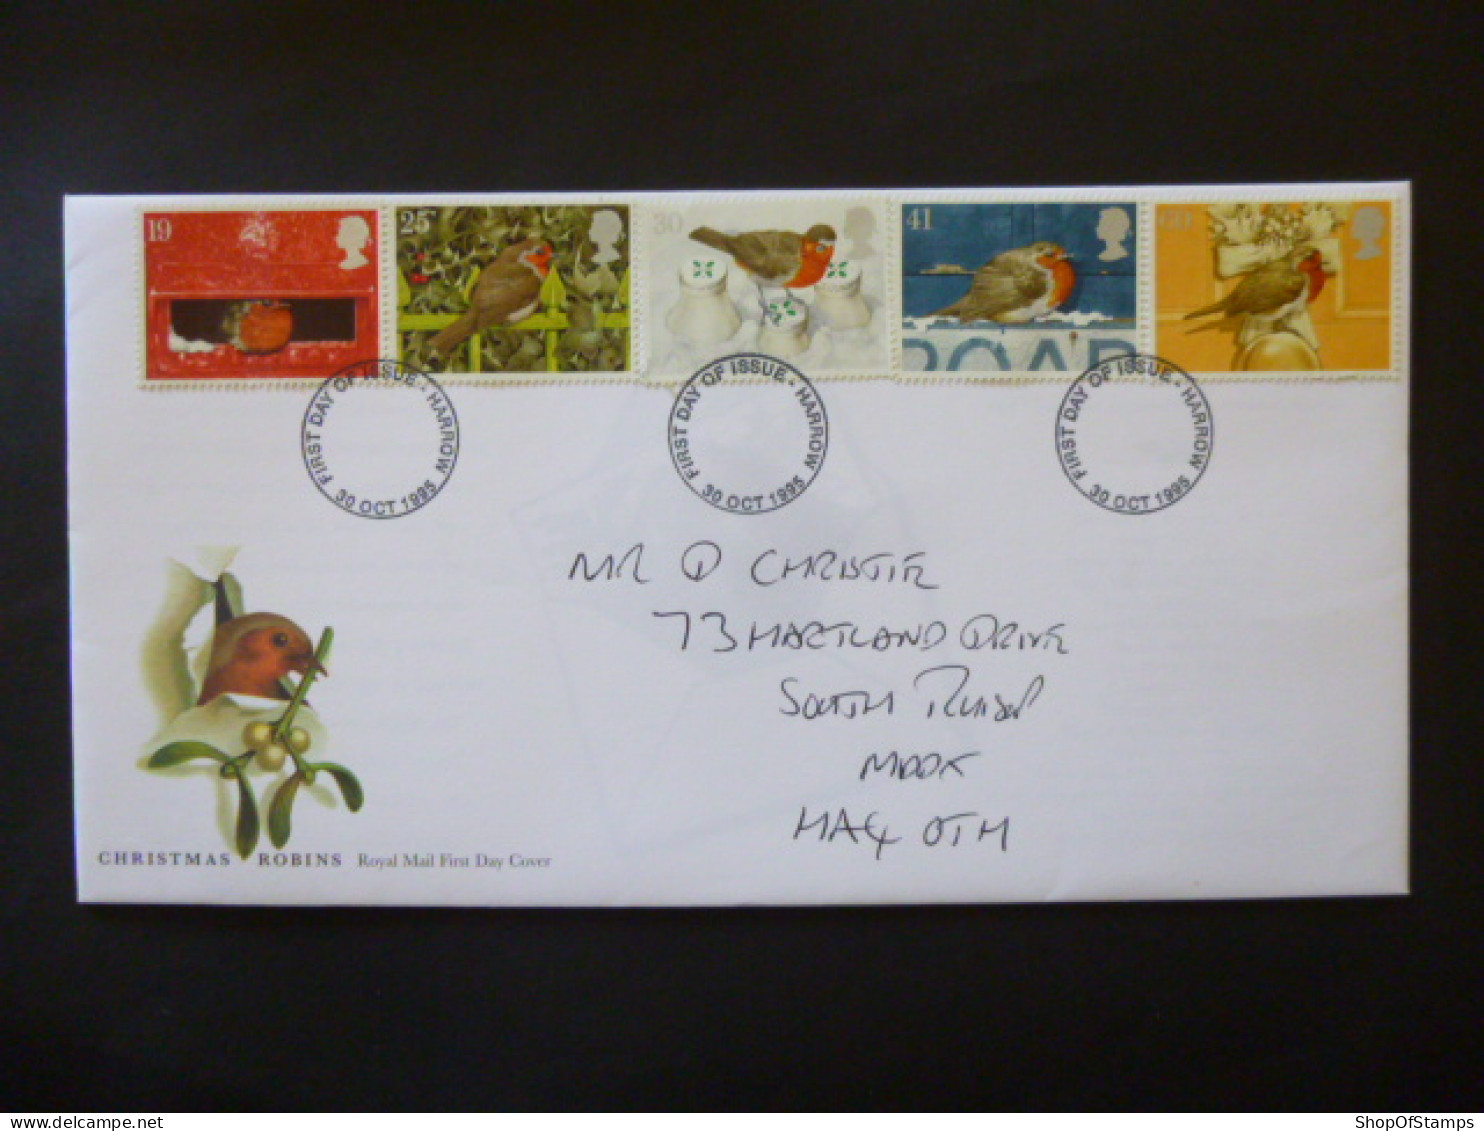 GREAT BRITAIN SG 1896-1900 CHRISTMAS ROBINS FDC HARROW - Unclassified